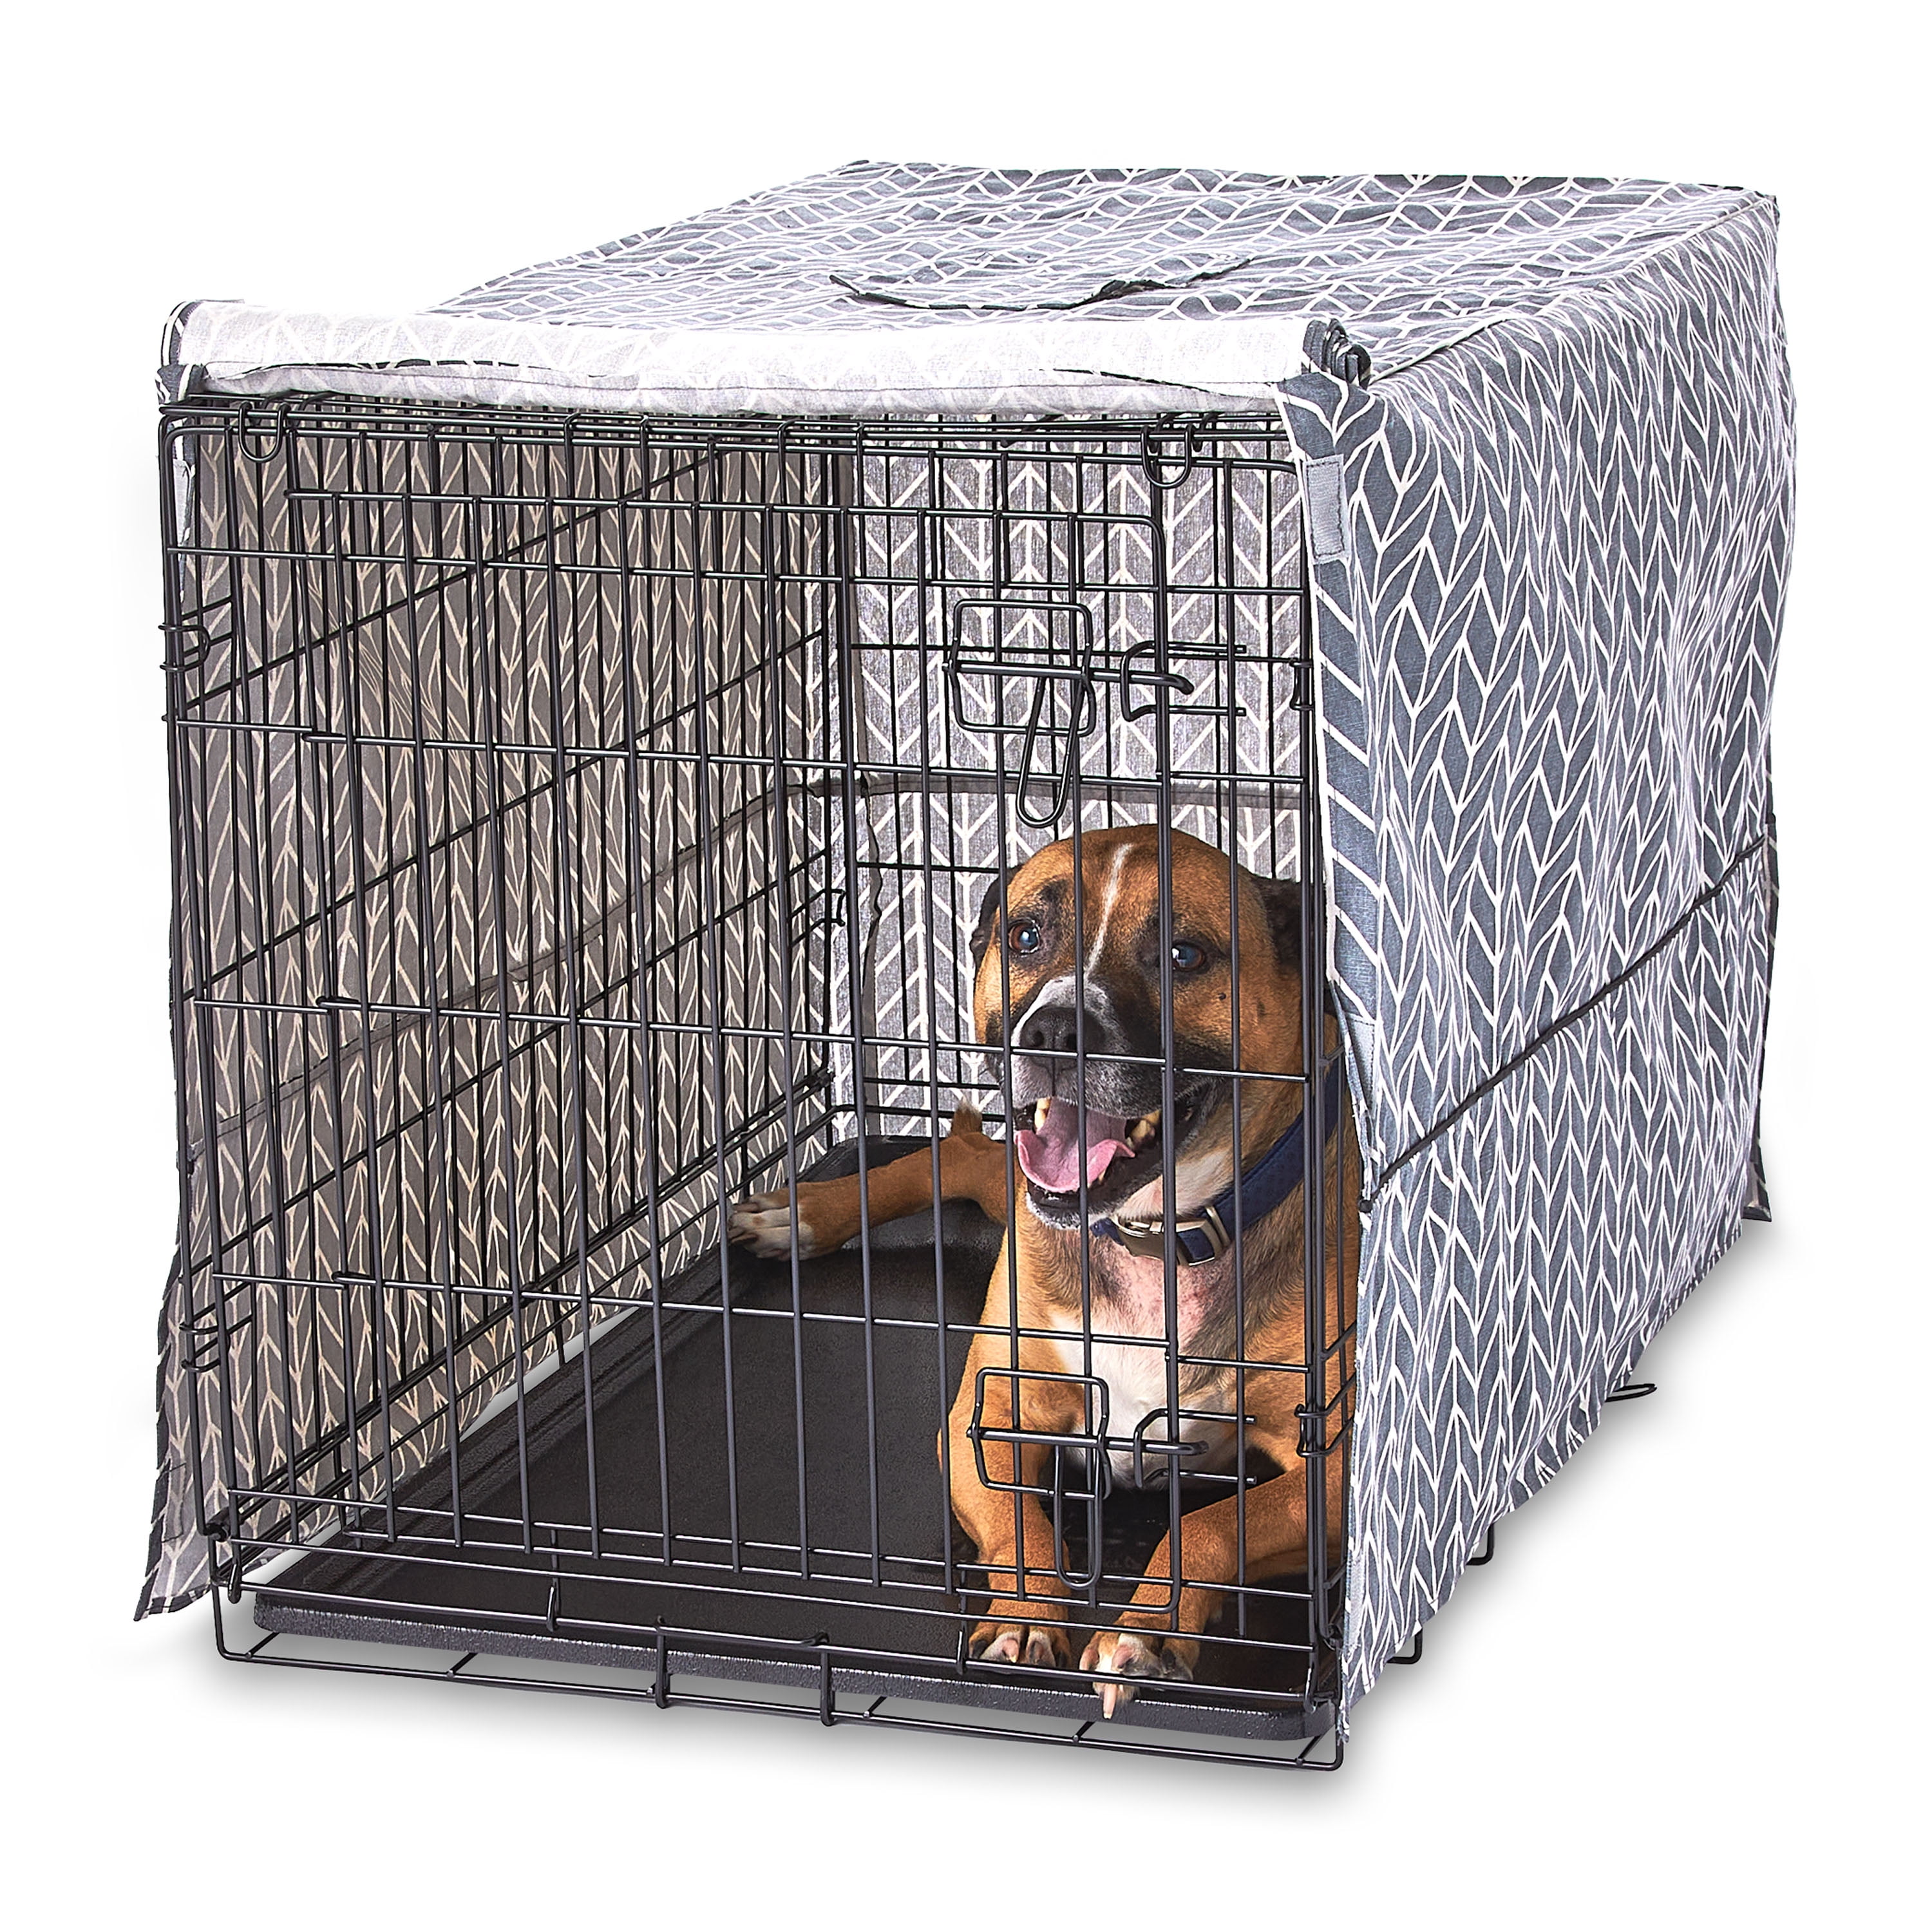 Custom Dog Crate Cover. Aesthetic Pet Kennel Cover in 6 Different